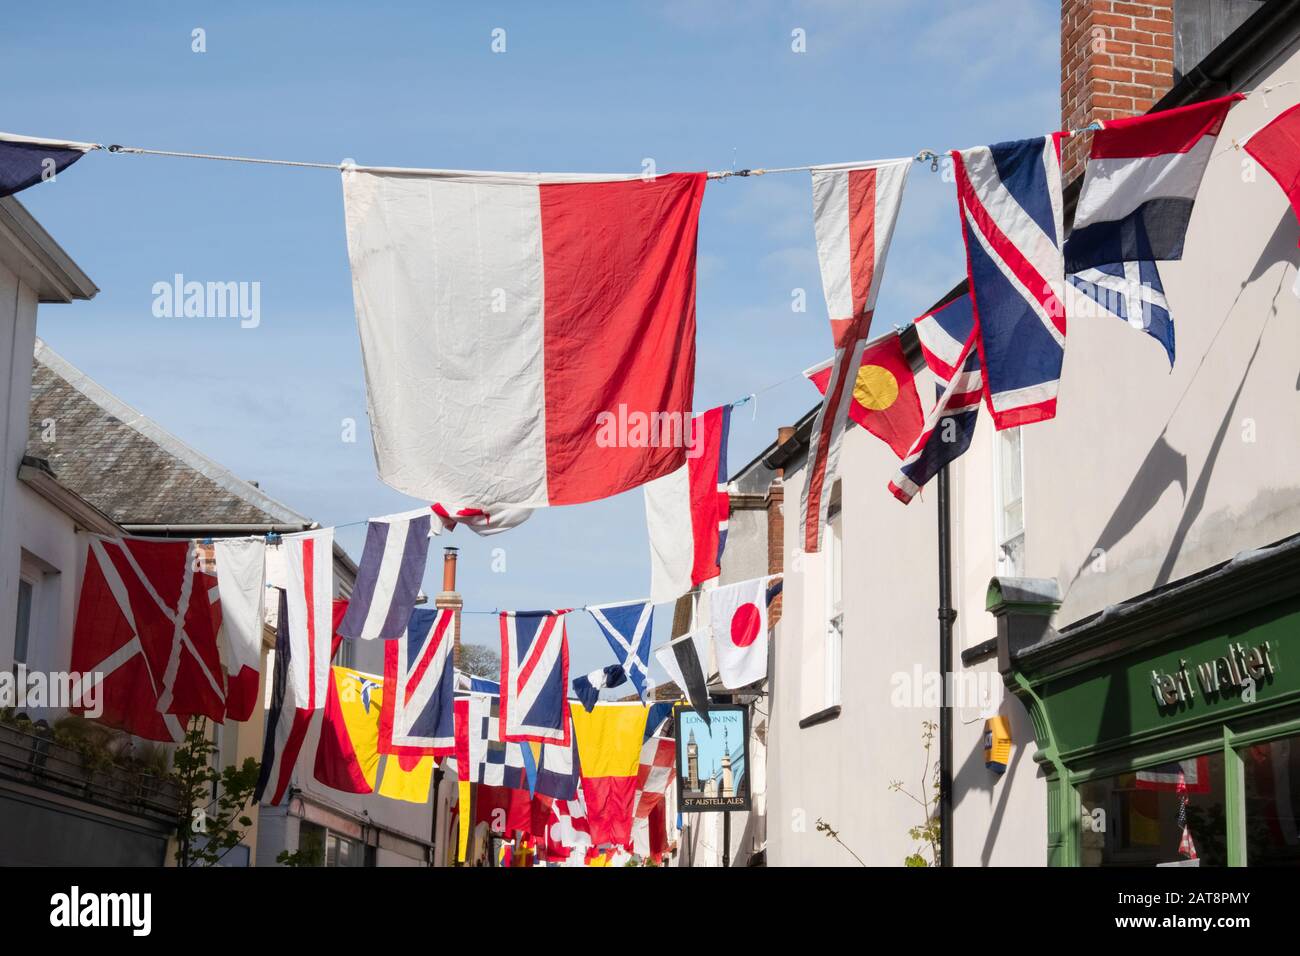 Traditional red and white flags hanging in street during the Obby Oss celebrations, Padstow, Cornwall, UK Stock Photo